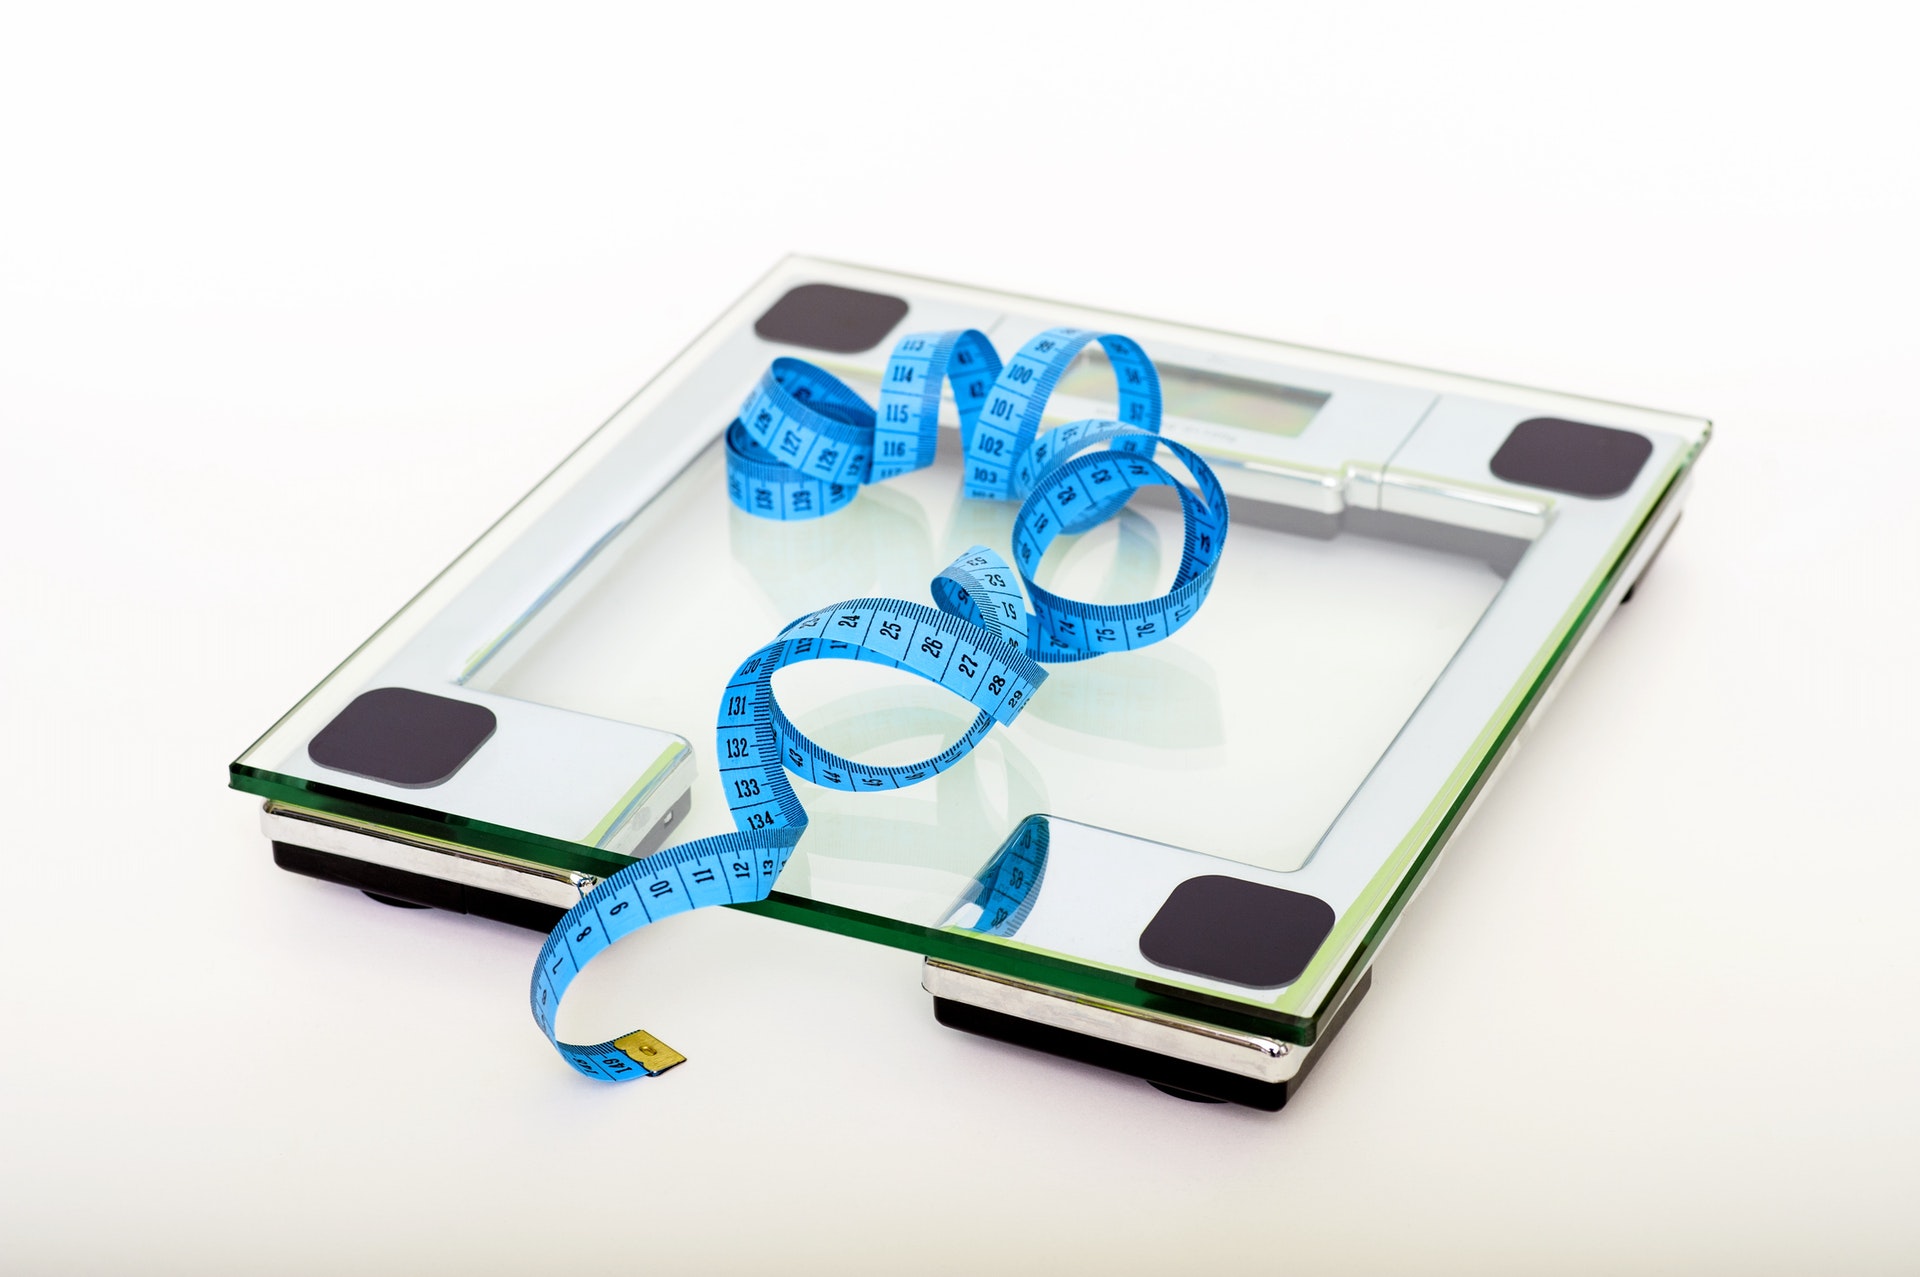 gaining weight with cancer - does cancer make you gain weight - cyberknife cancer treatment in south florida - cyberknife miami